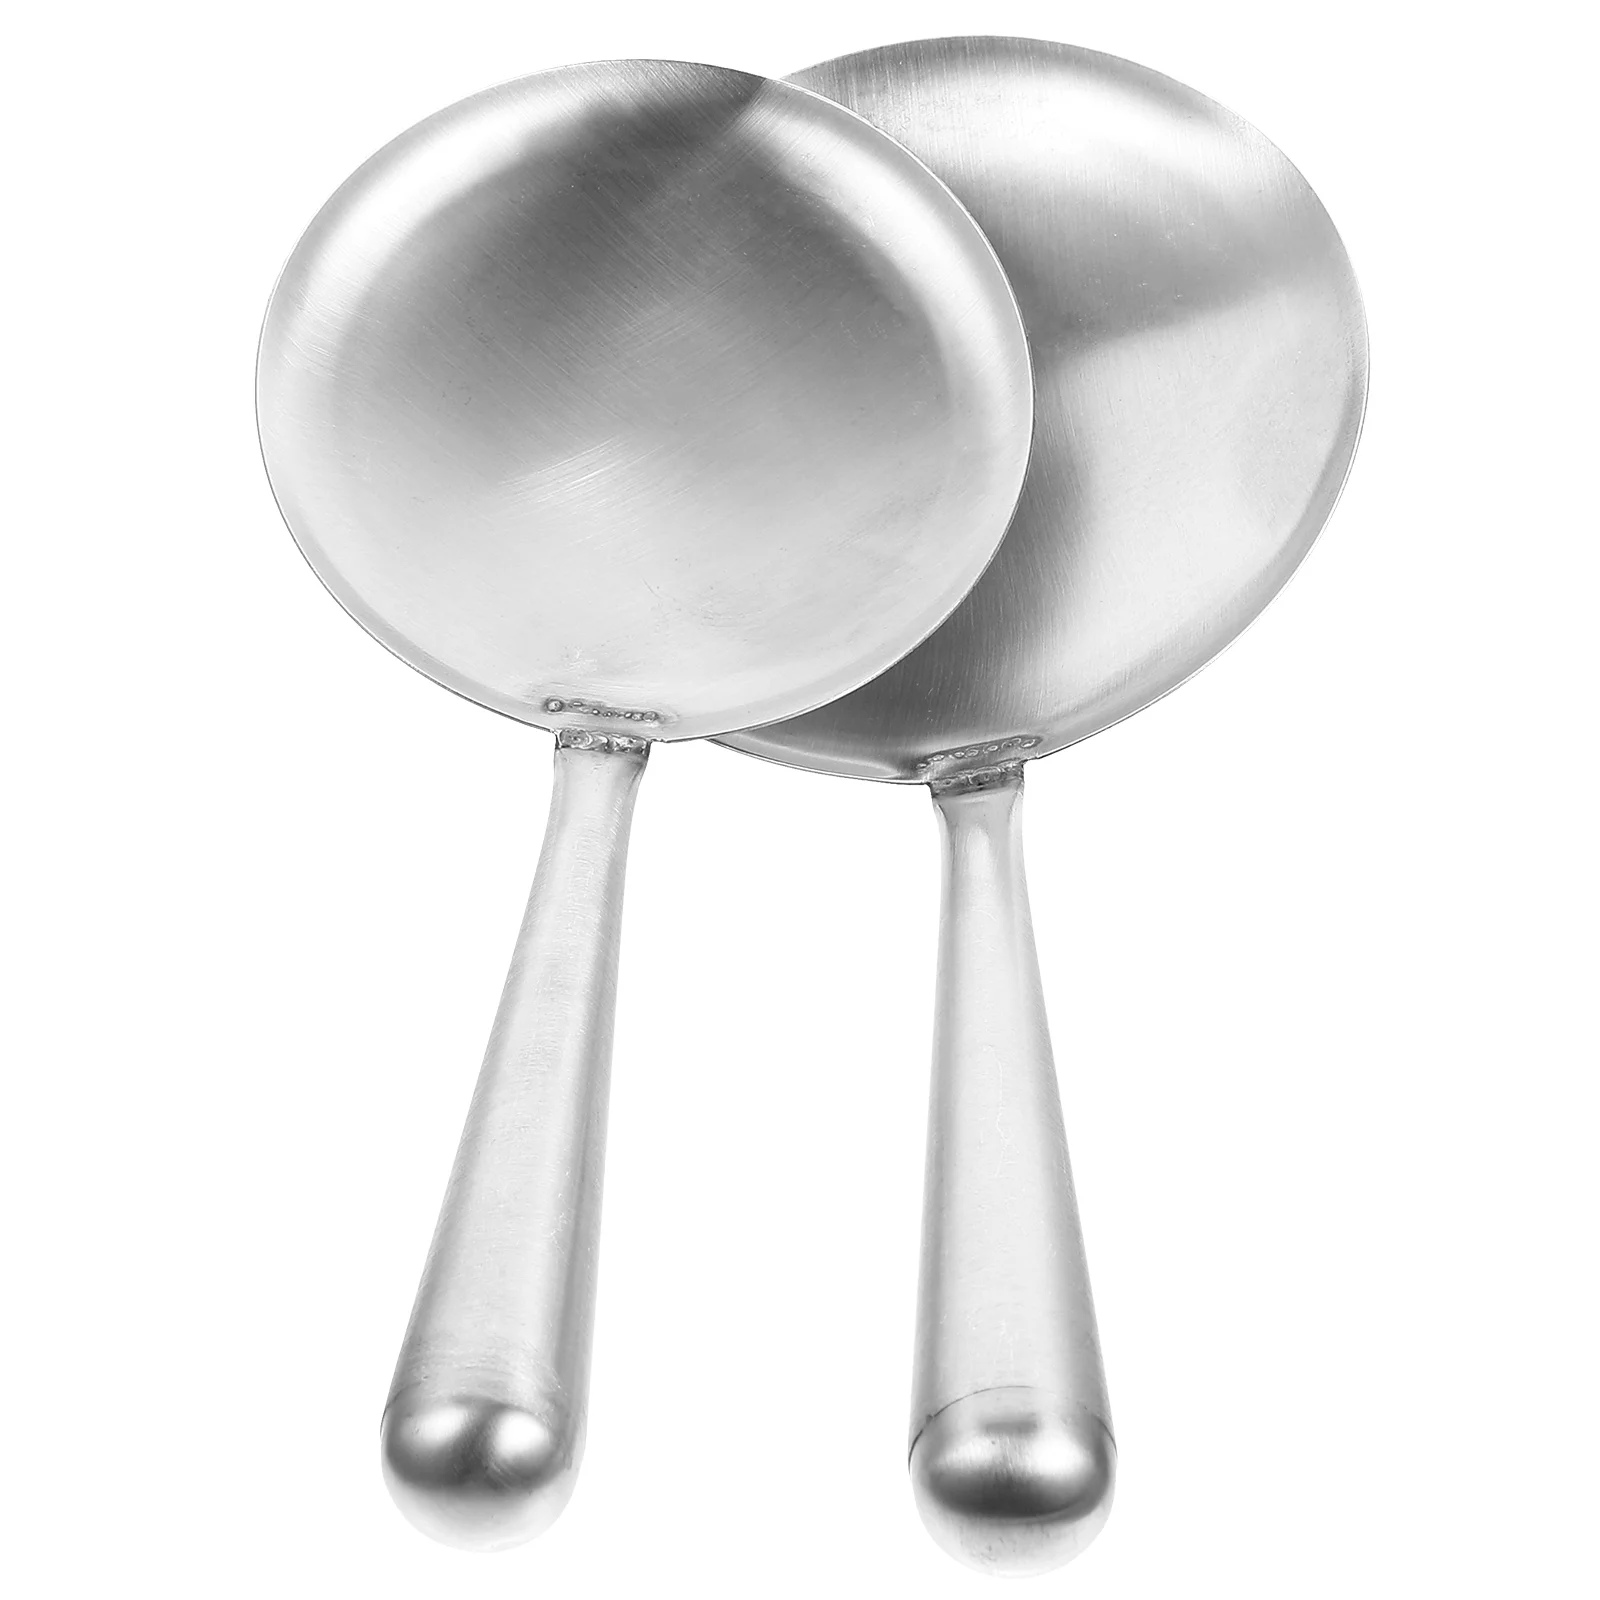 

2 Pcs Rice Scoops Stainless Steel Cooking Ladle Japanese Spoon Cooker Chinese Soup Spoons